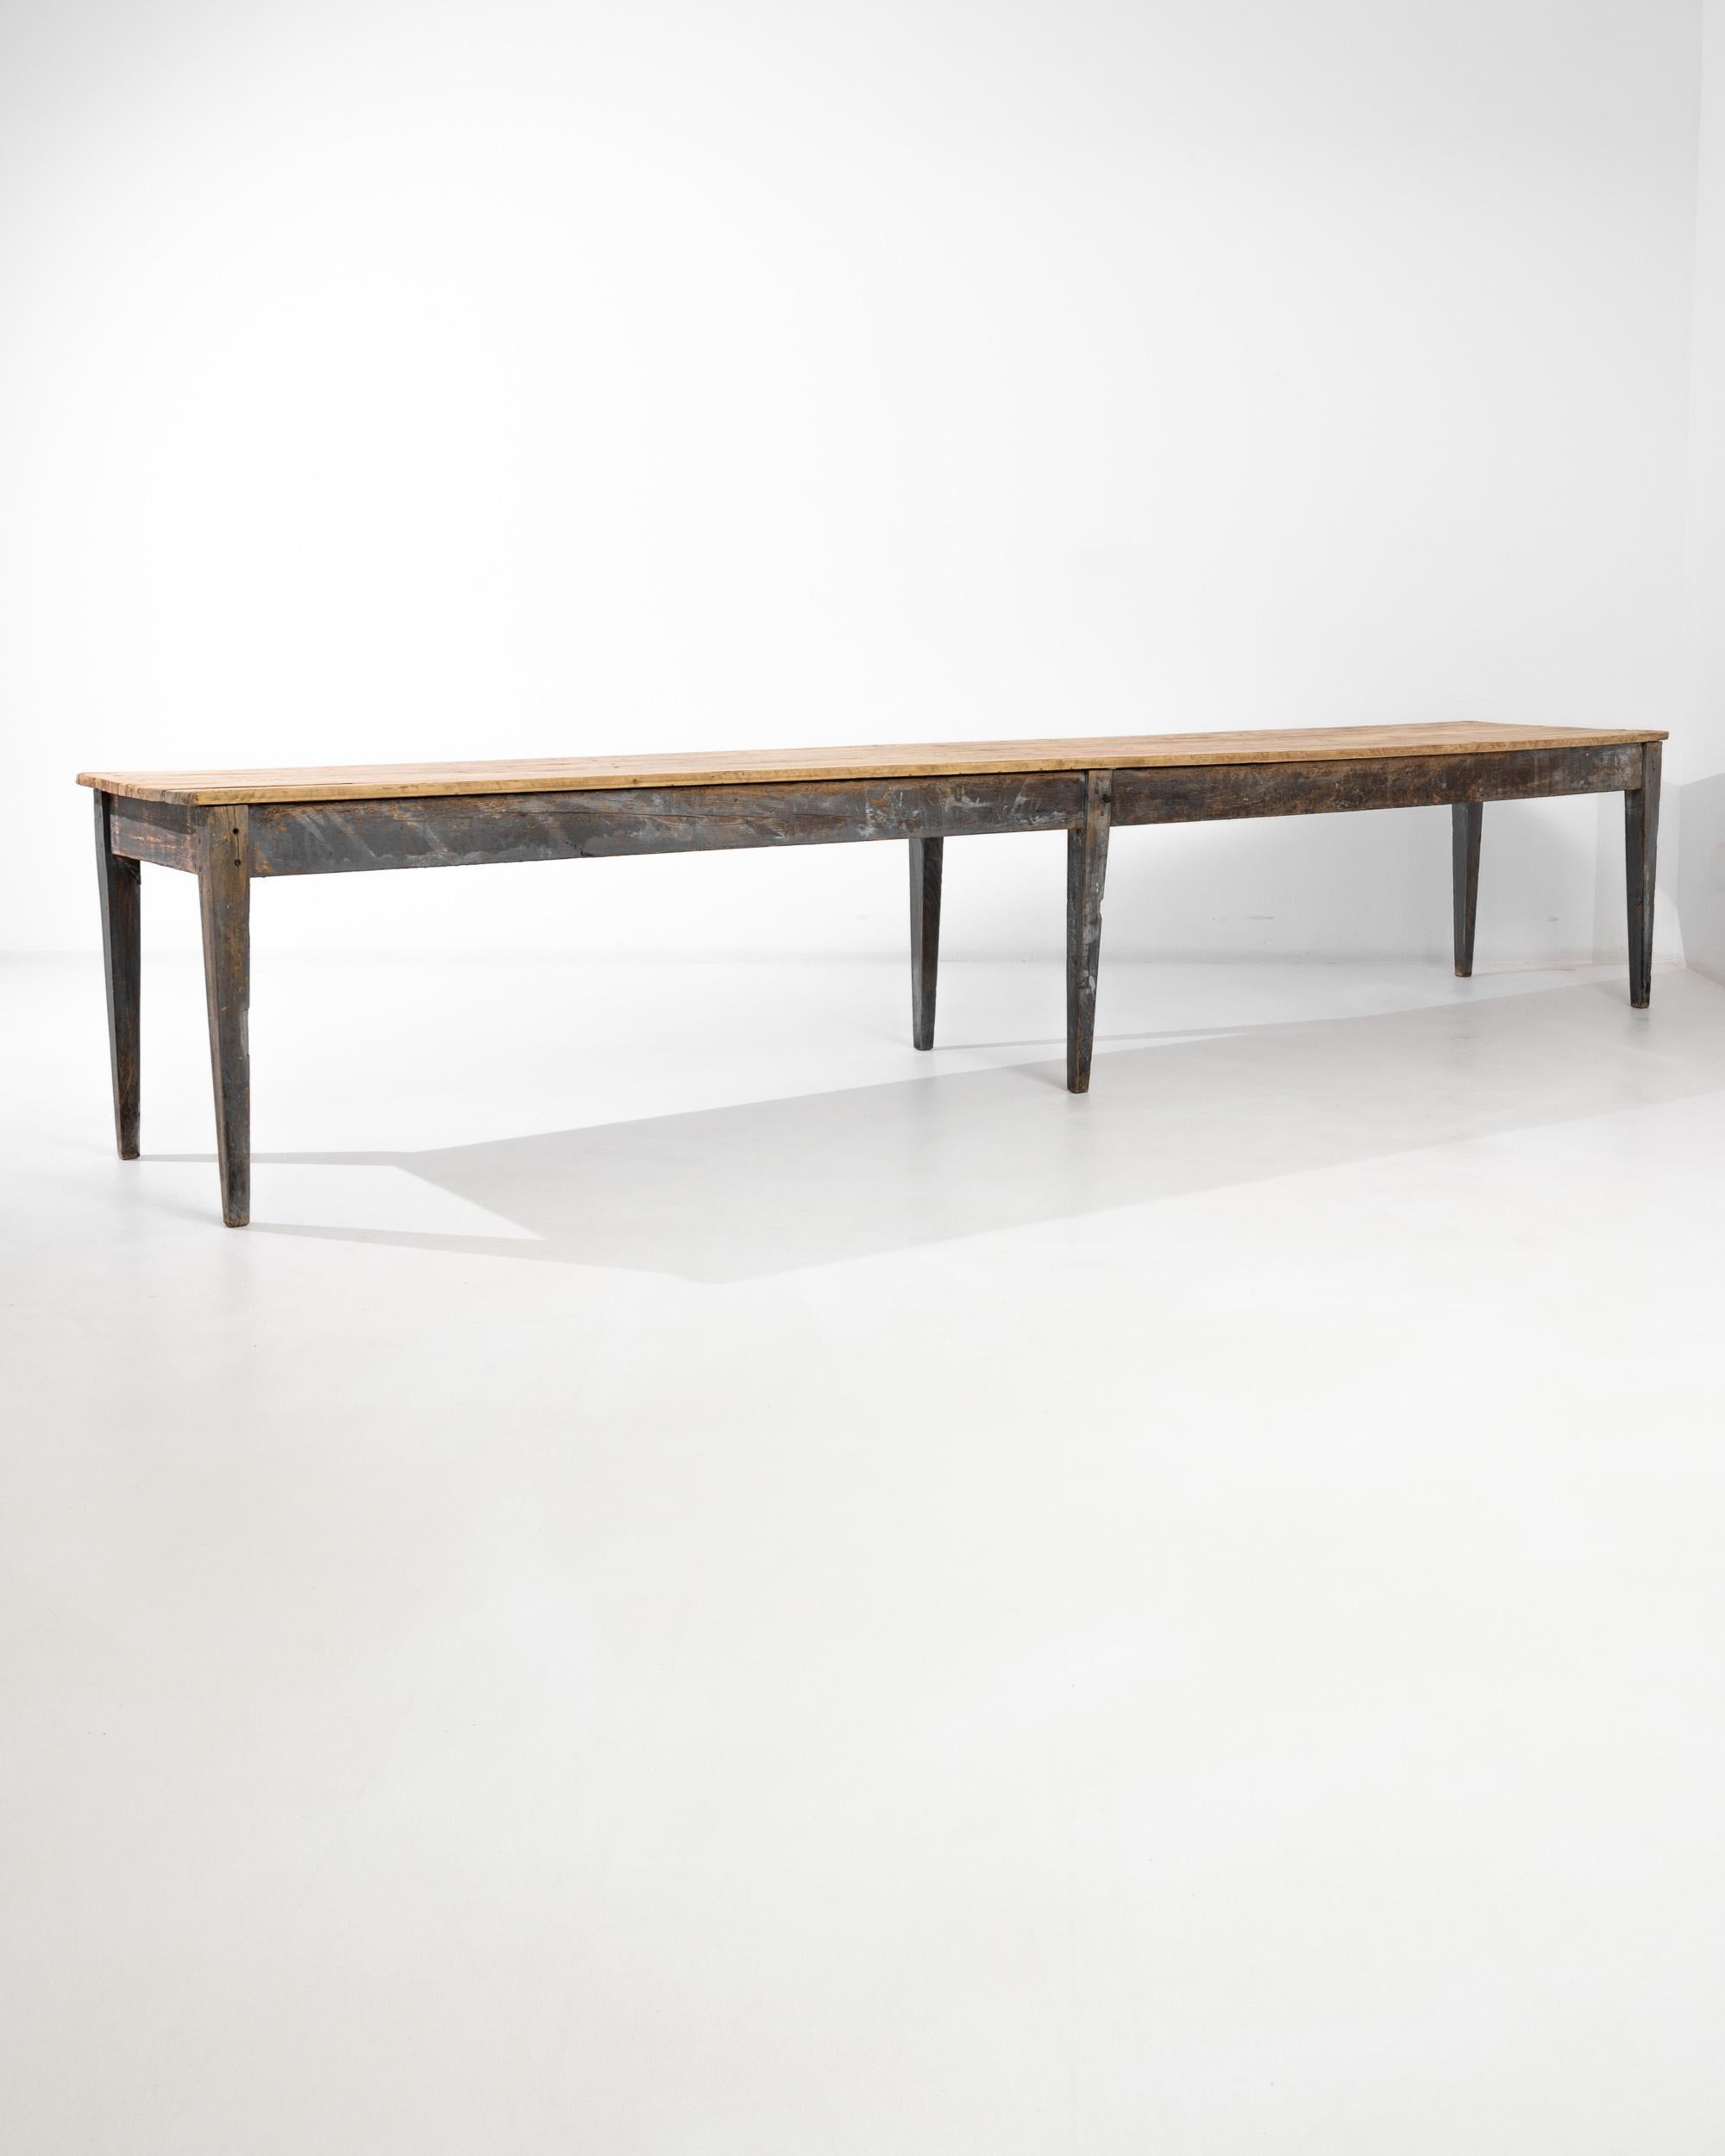 This impressively long wooden table was made in France circa 1900. Three pairs of legs with tapered feet are attached to a stout and wide apron. The blonde rustic tabletop lends a refreshing counterpoint, contrasting with the patinated gray finish